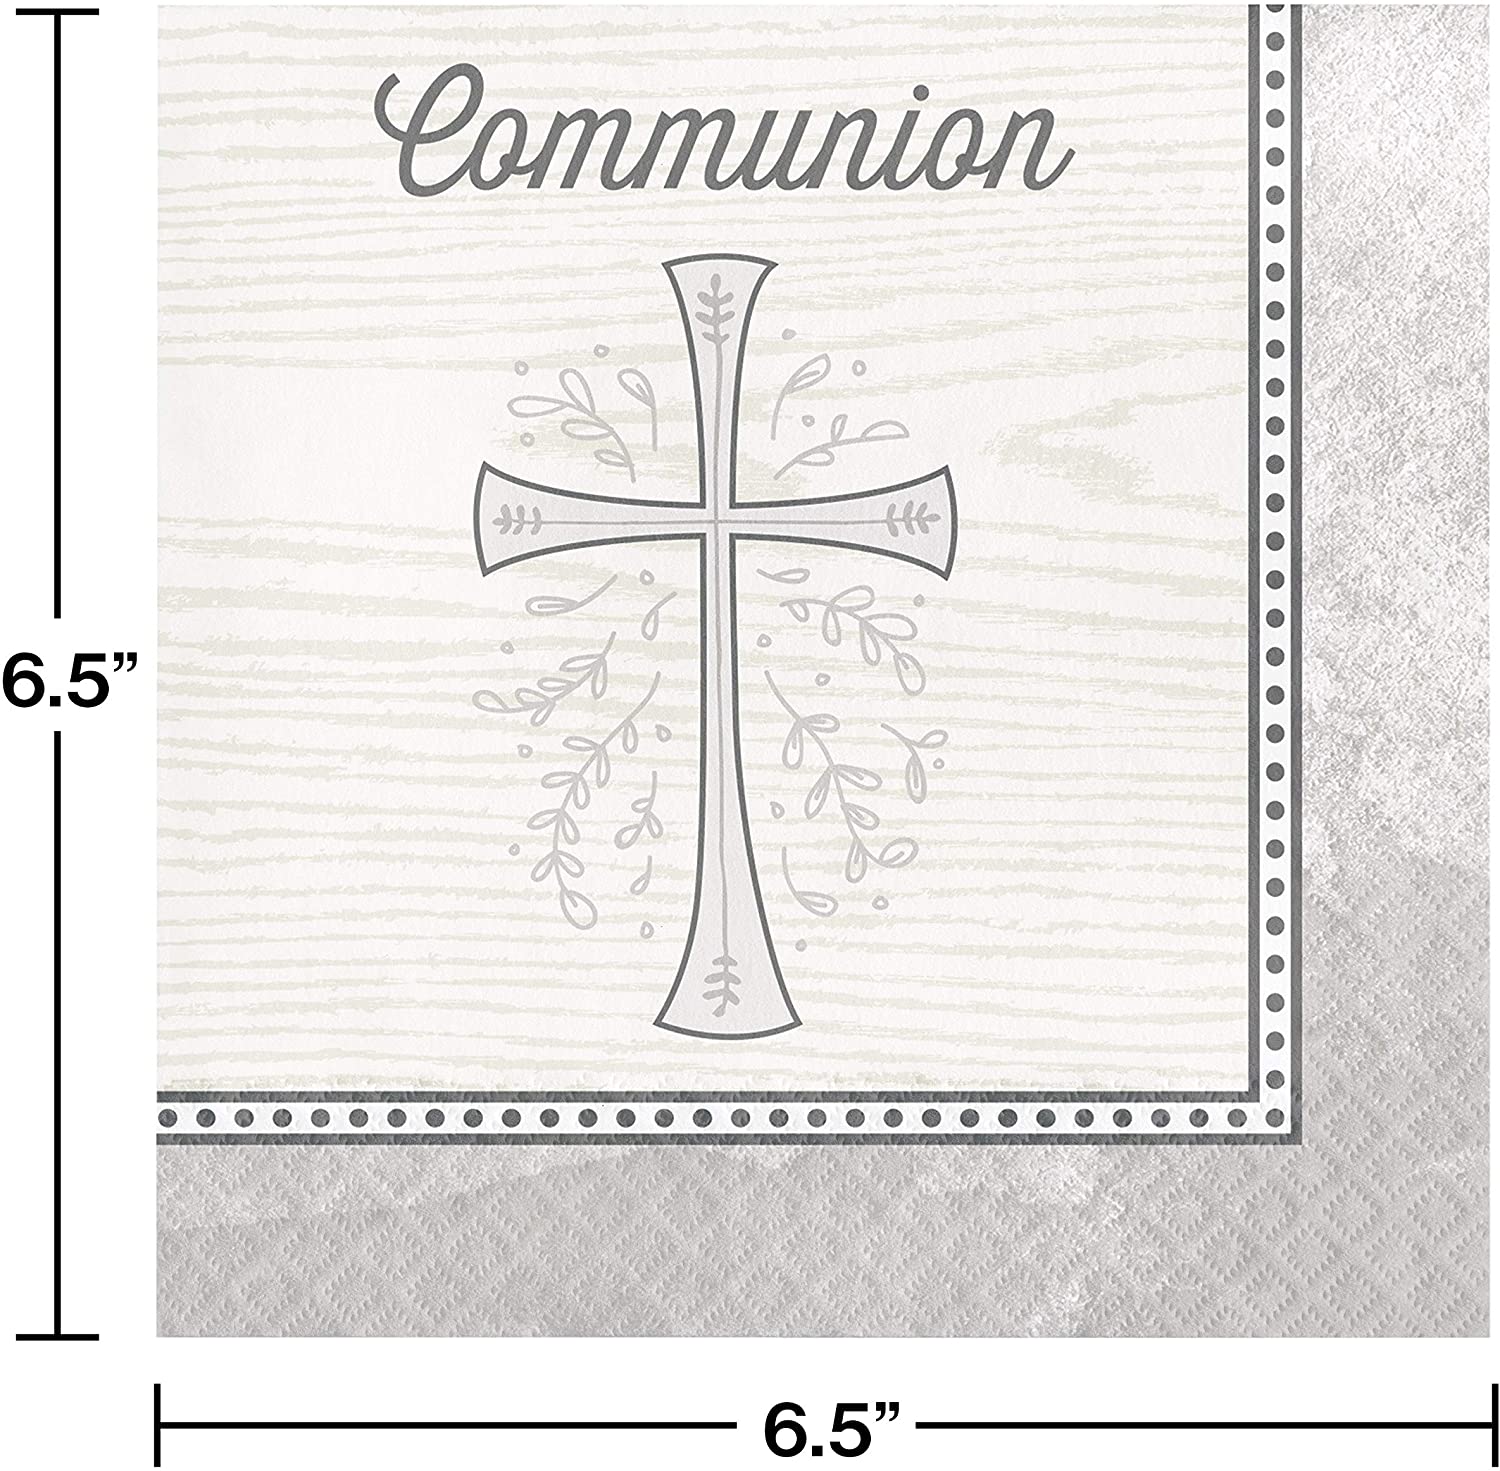 Religious Silver Cross Beverage and Communion Luncheon Paper Disposable Napkins Bundle